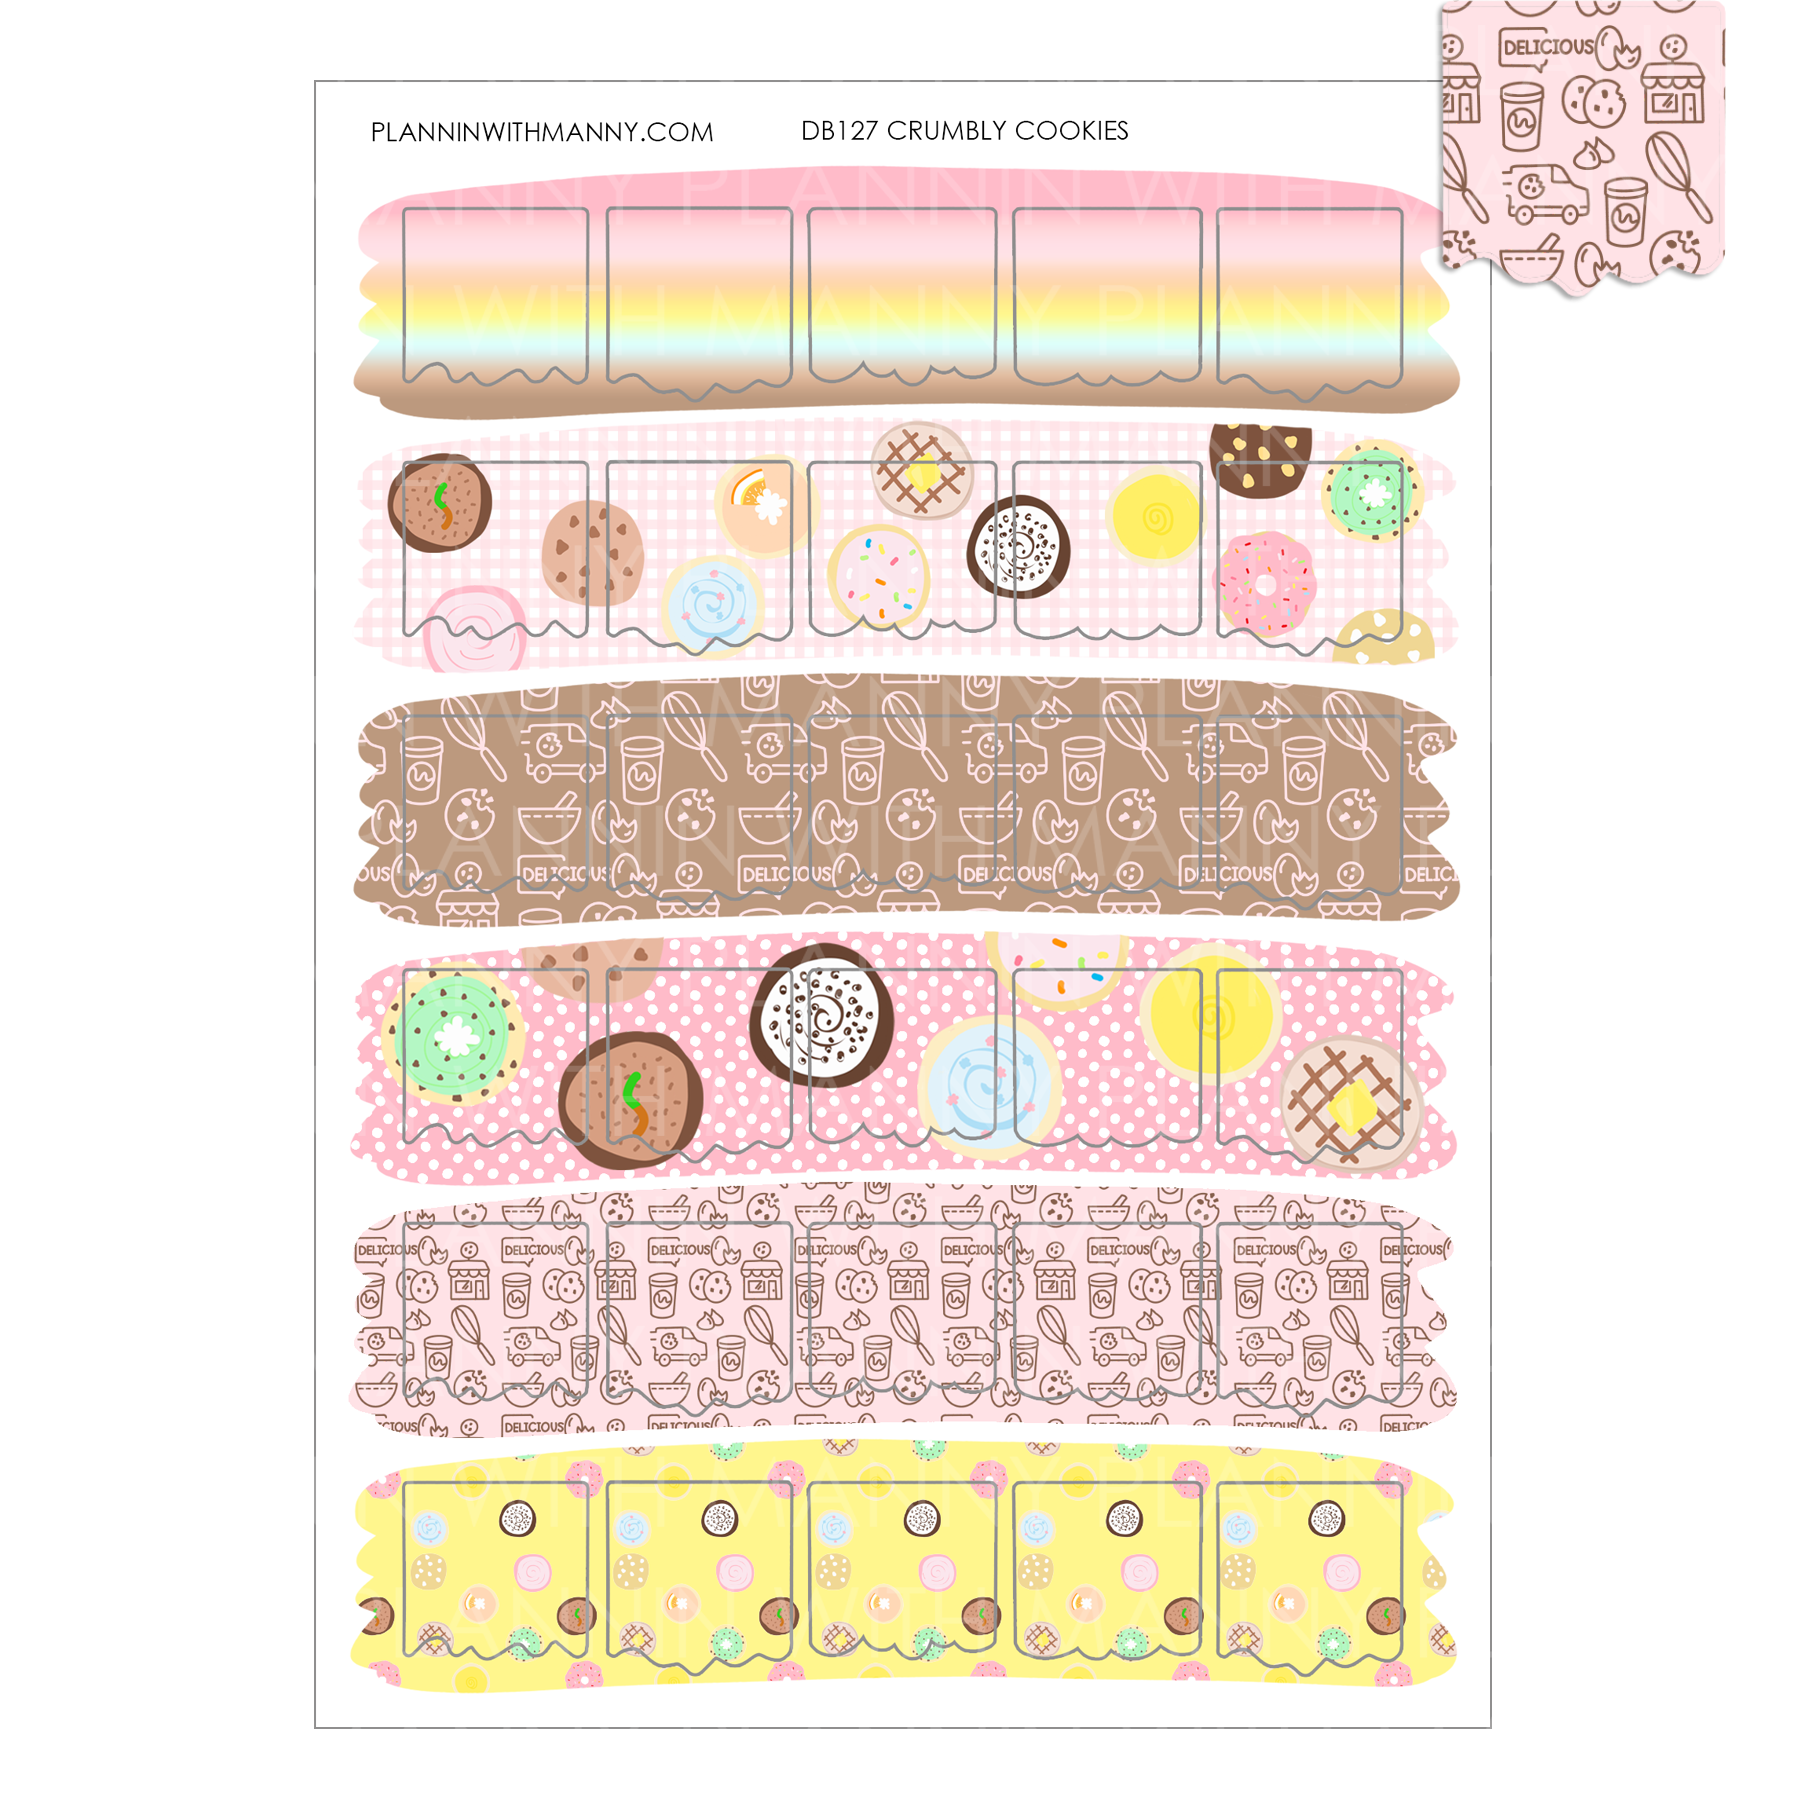 DB127 Crumbl Cookies Flag Planner Stickers